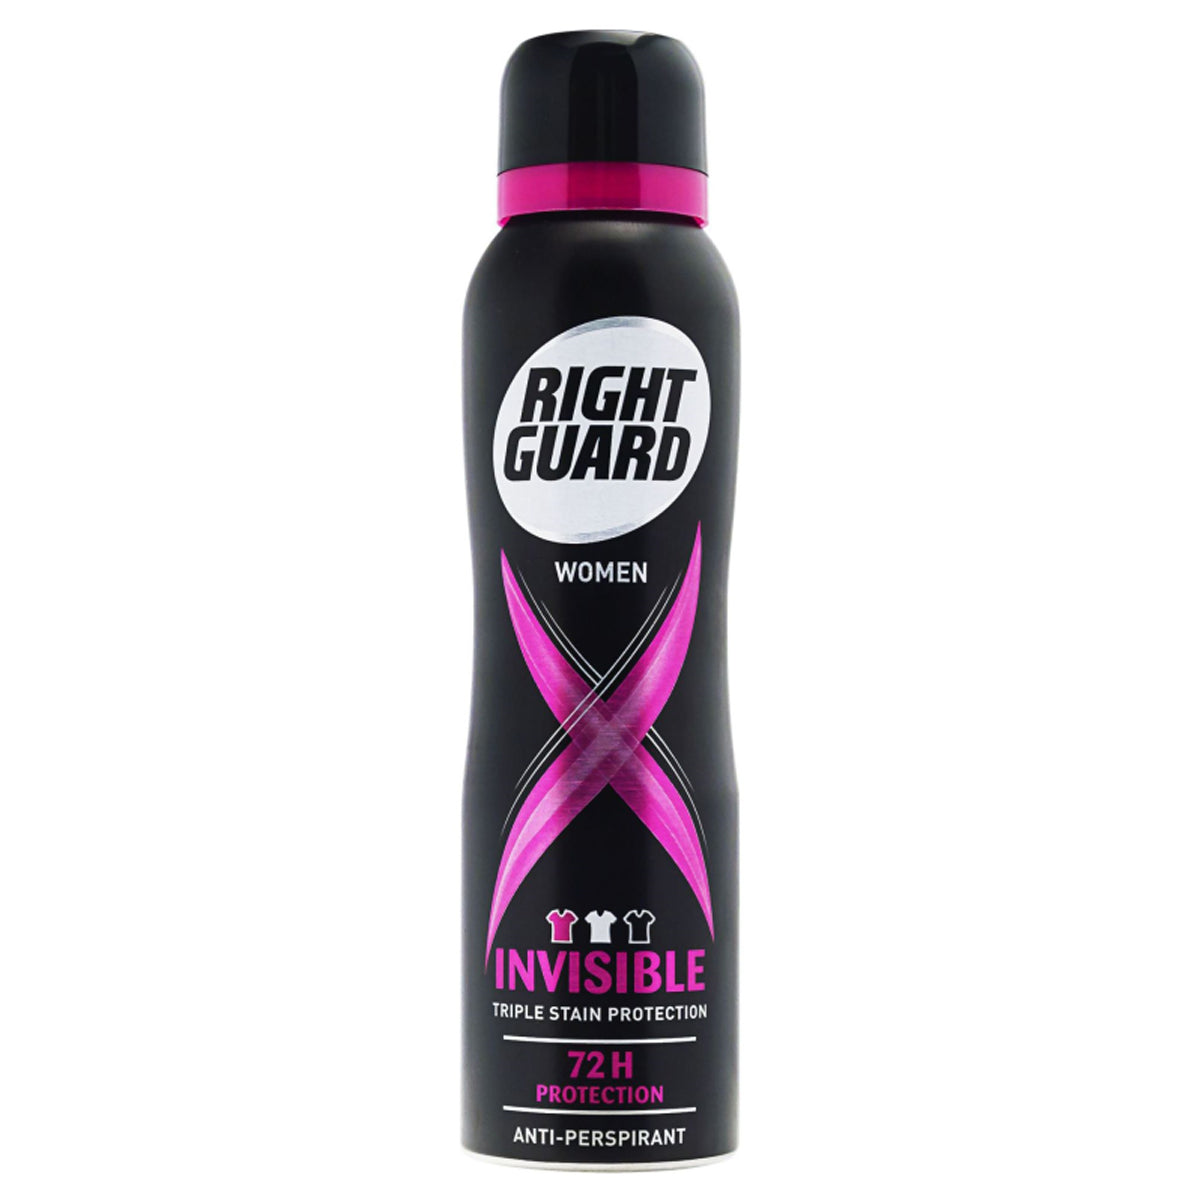 A black and pink bottle of Right Guard - Women's Invisible Anti-perspirant Spray - 150ml.